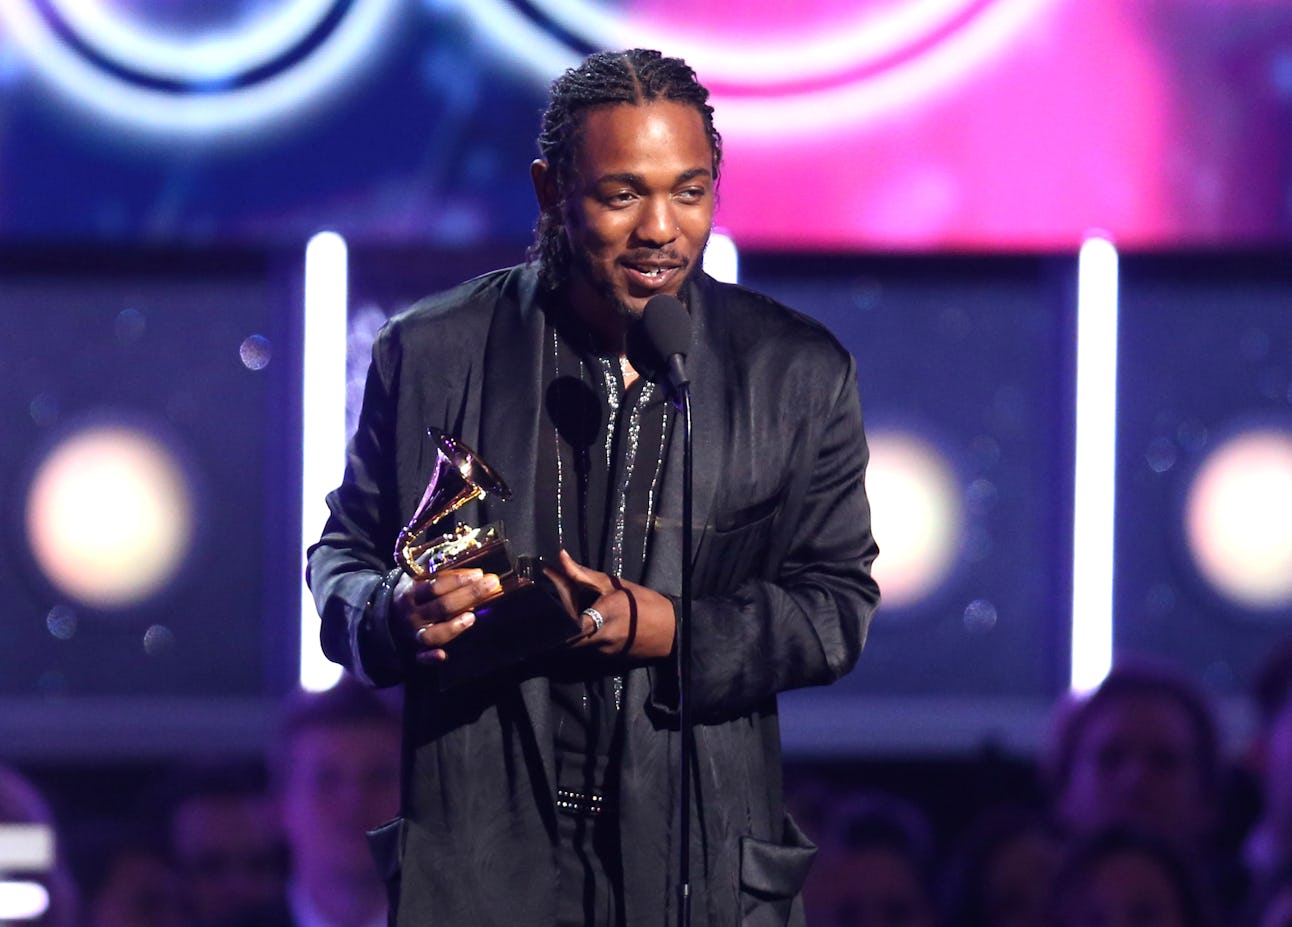 Kendrick Lamar is the first hiphop artist to win a Pulitzer Prize in music